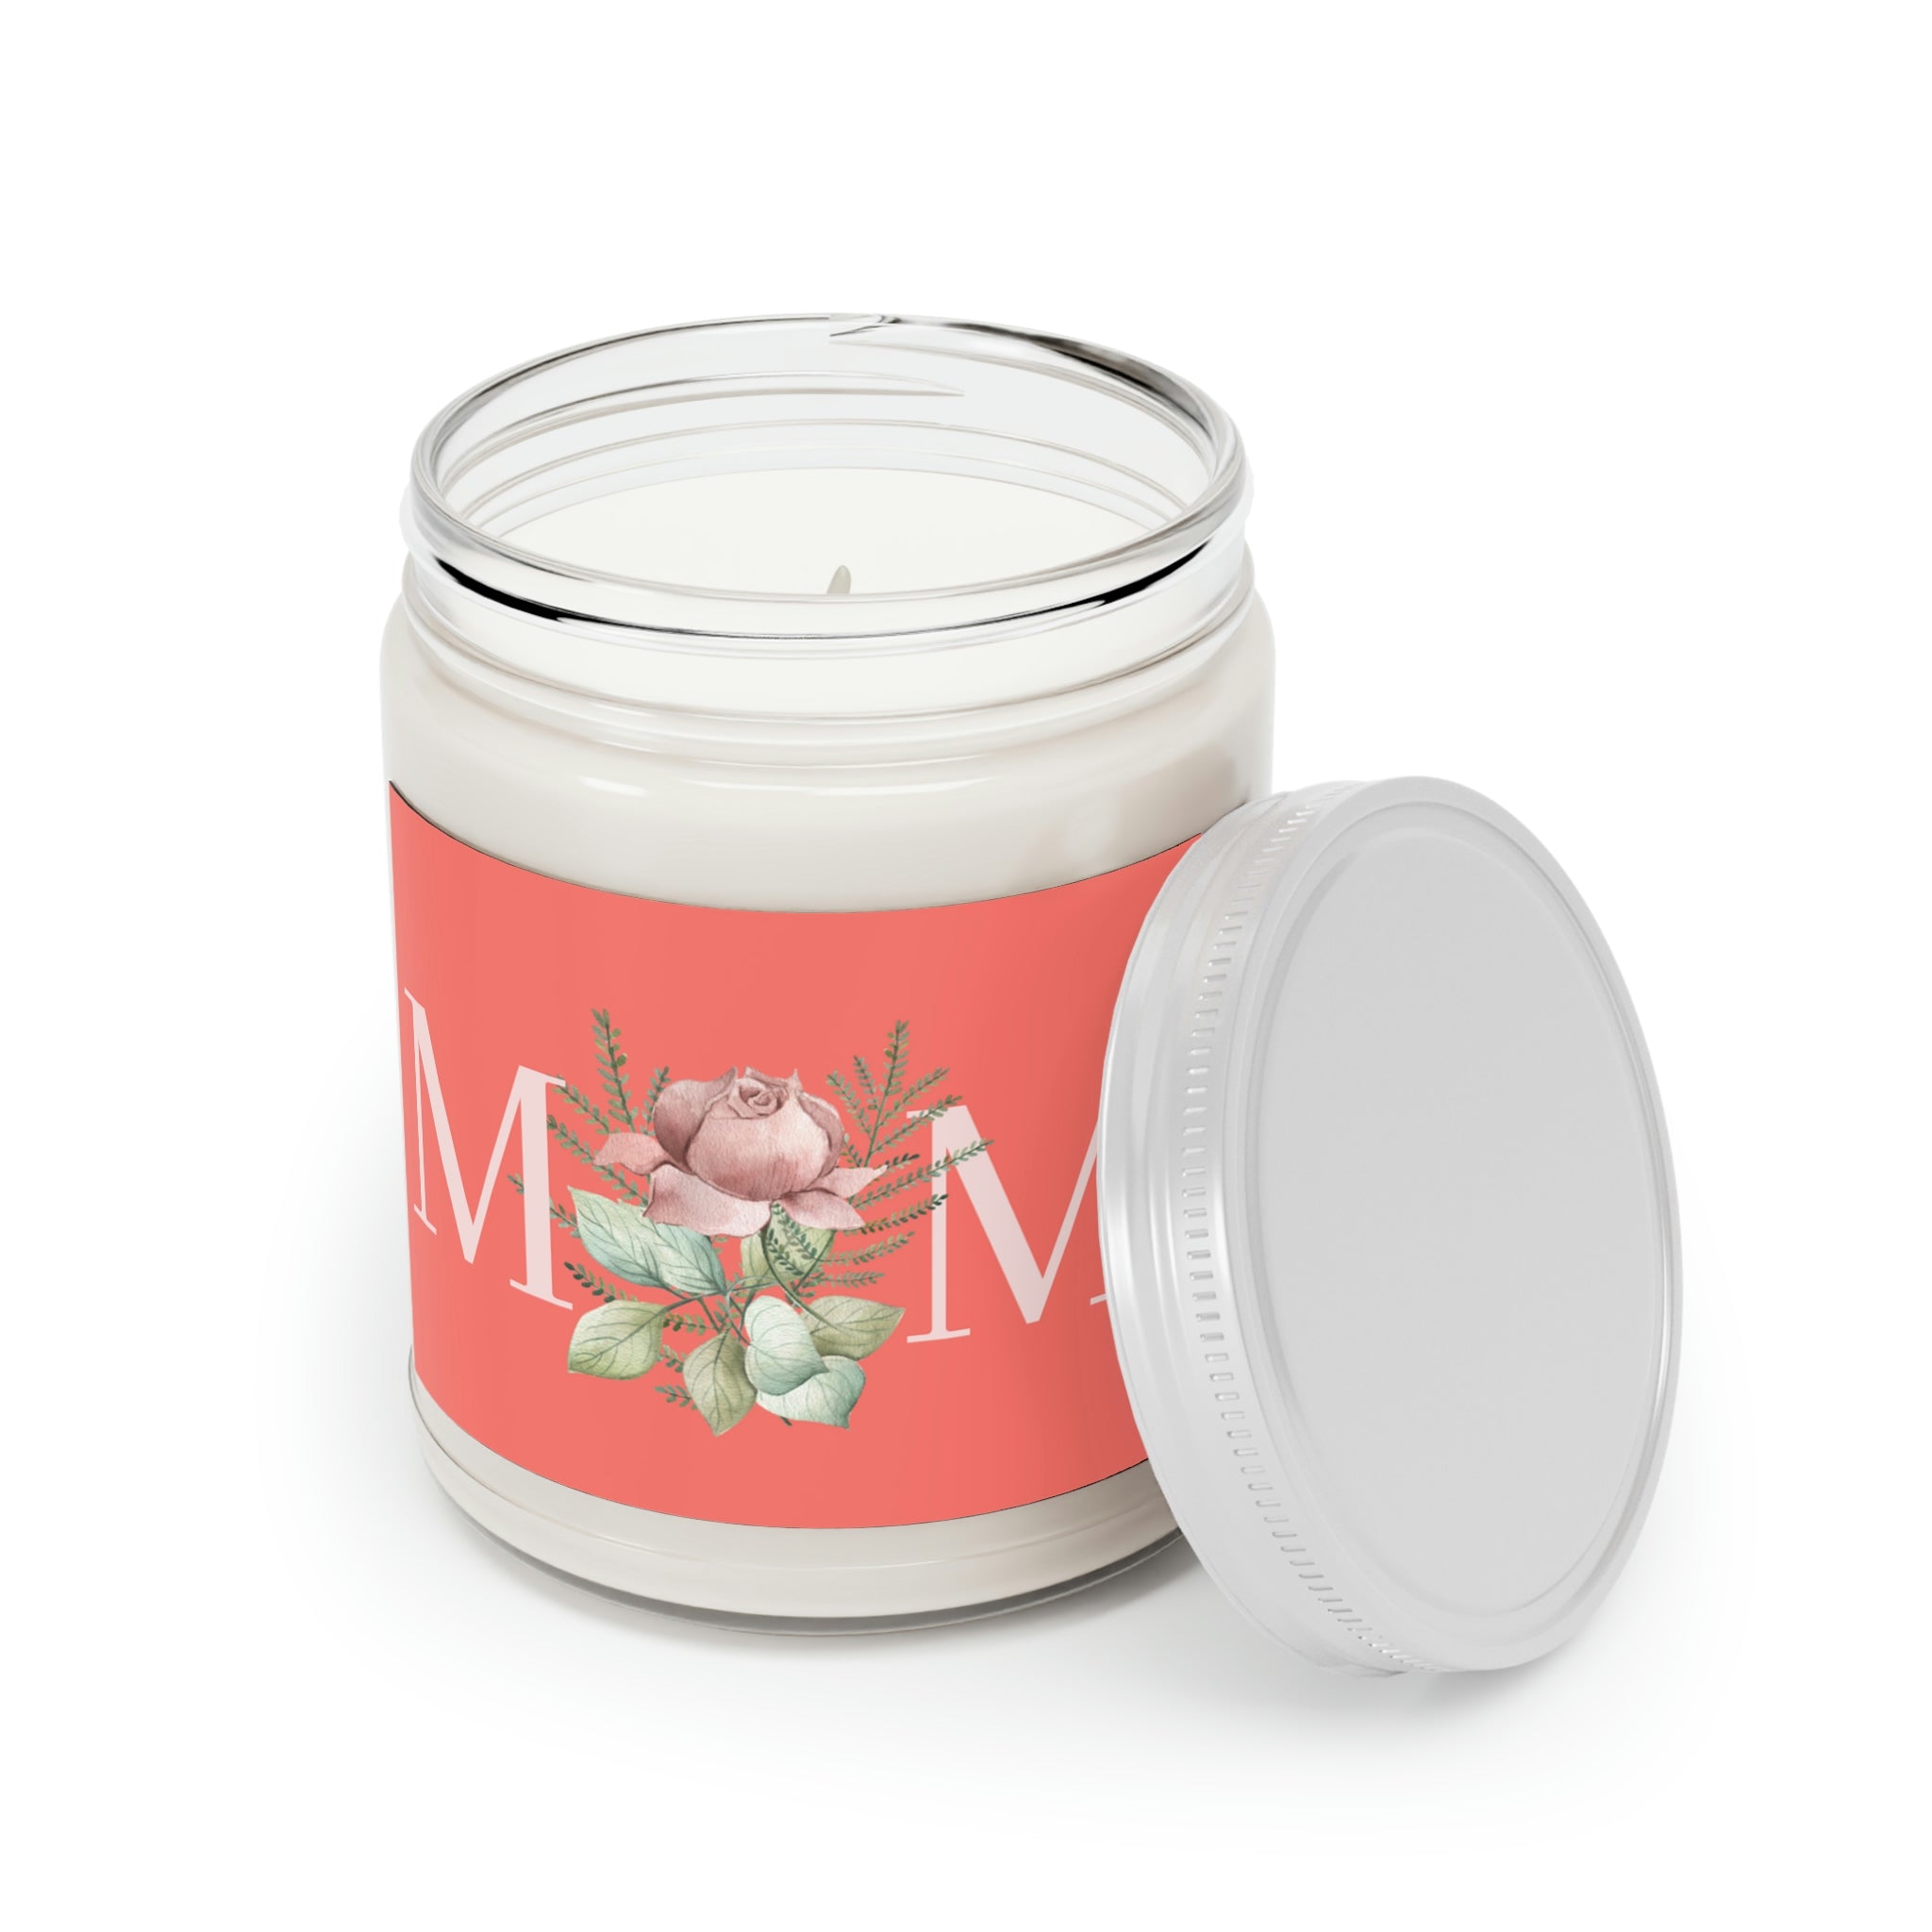 Mom Aromatherapy Scented Candle, Eco-Friendly Soy Wax, 9o Open Jar